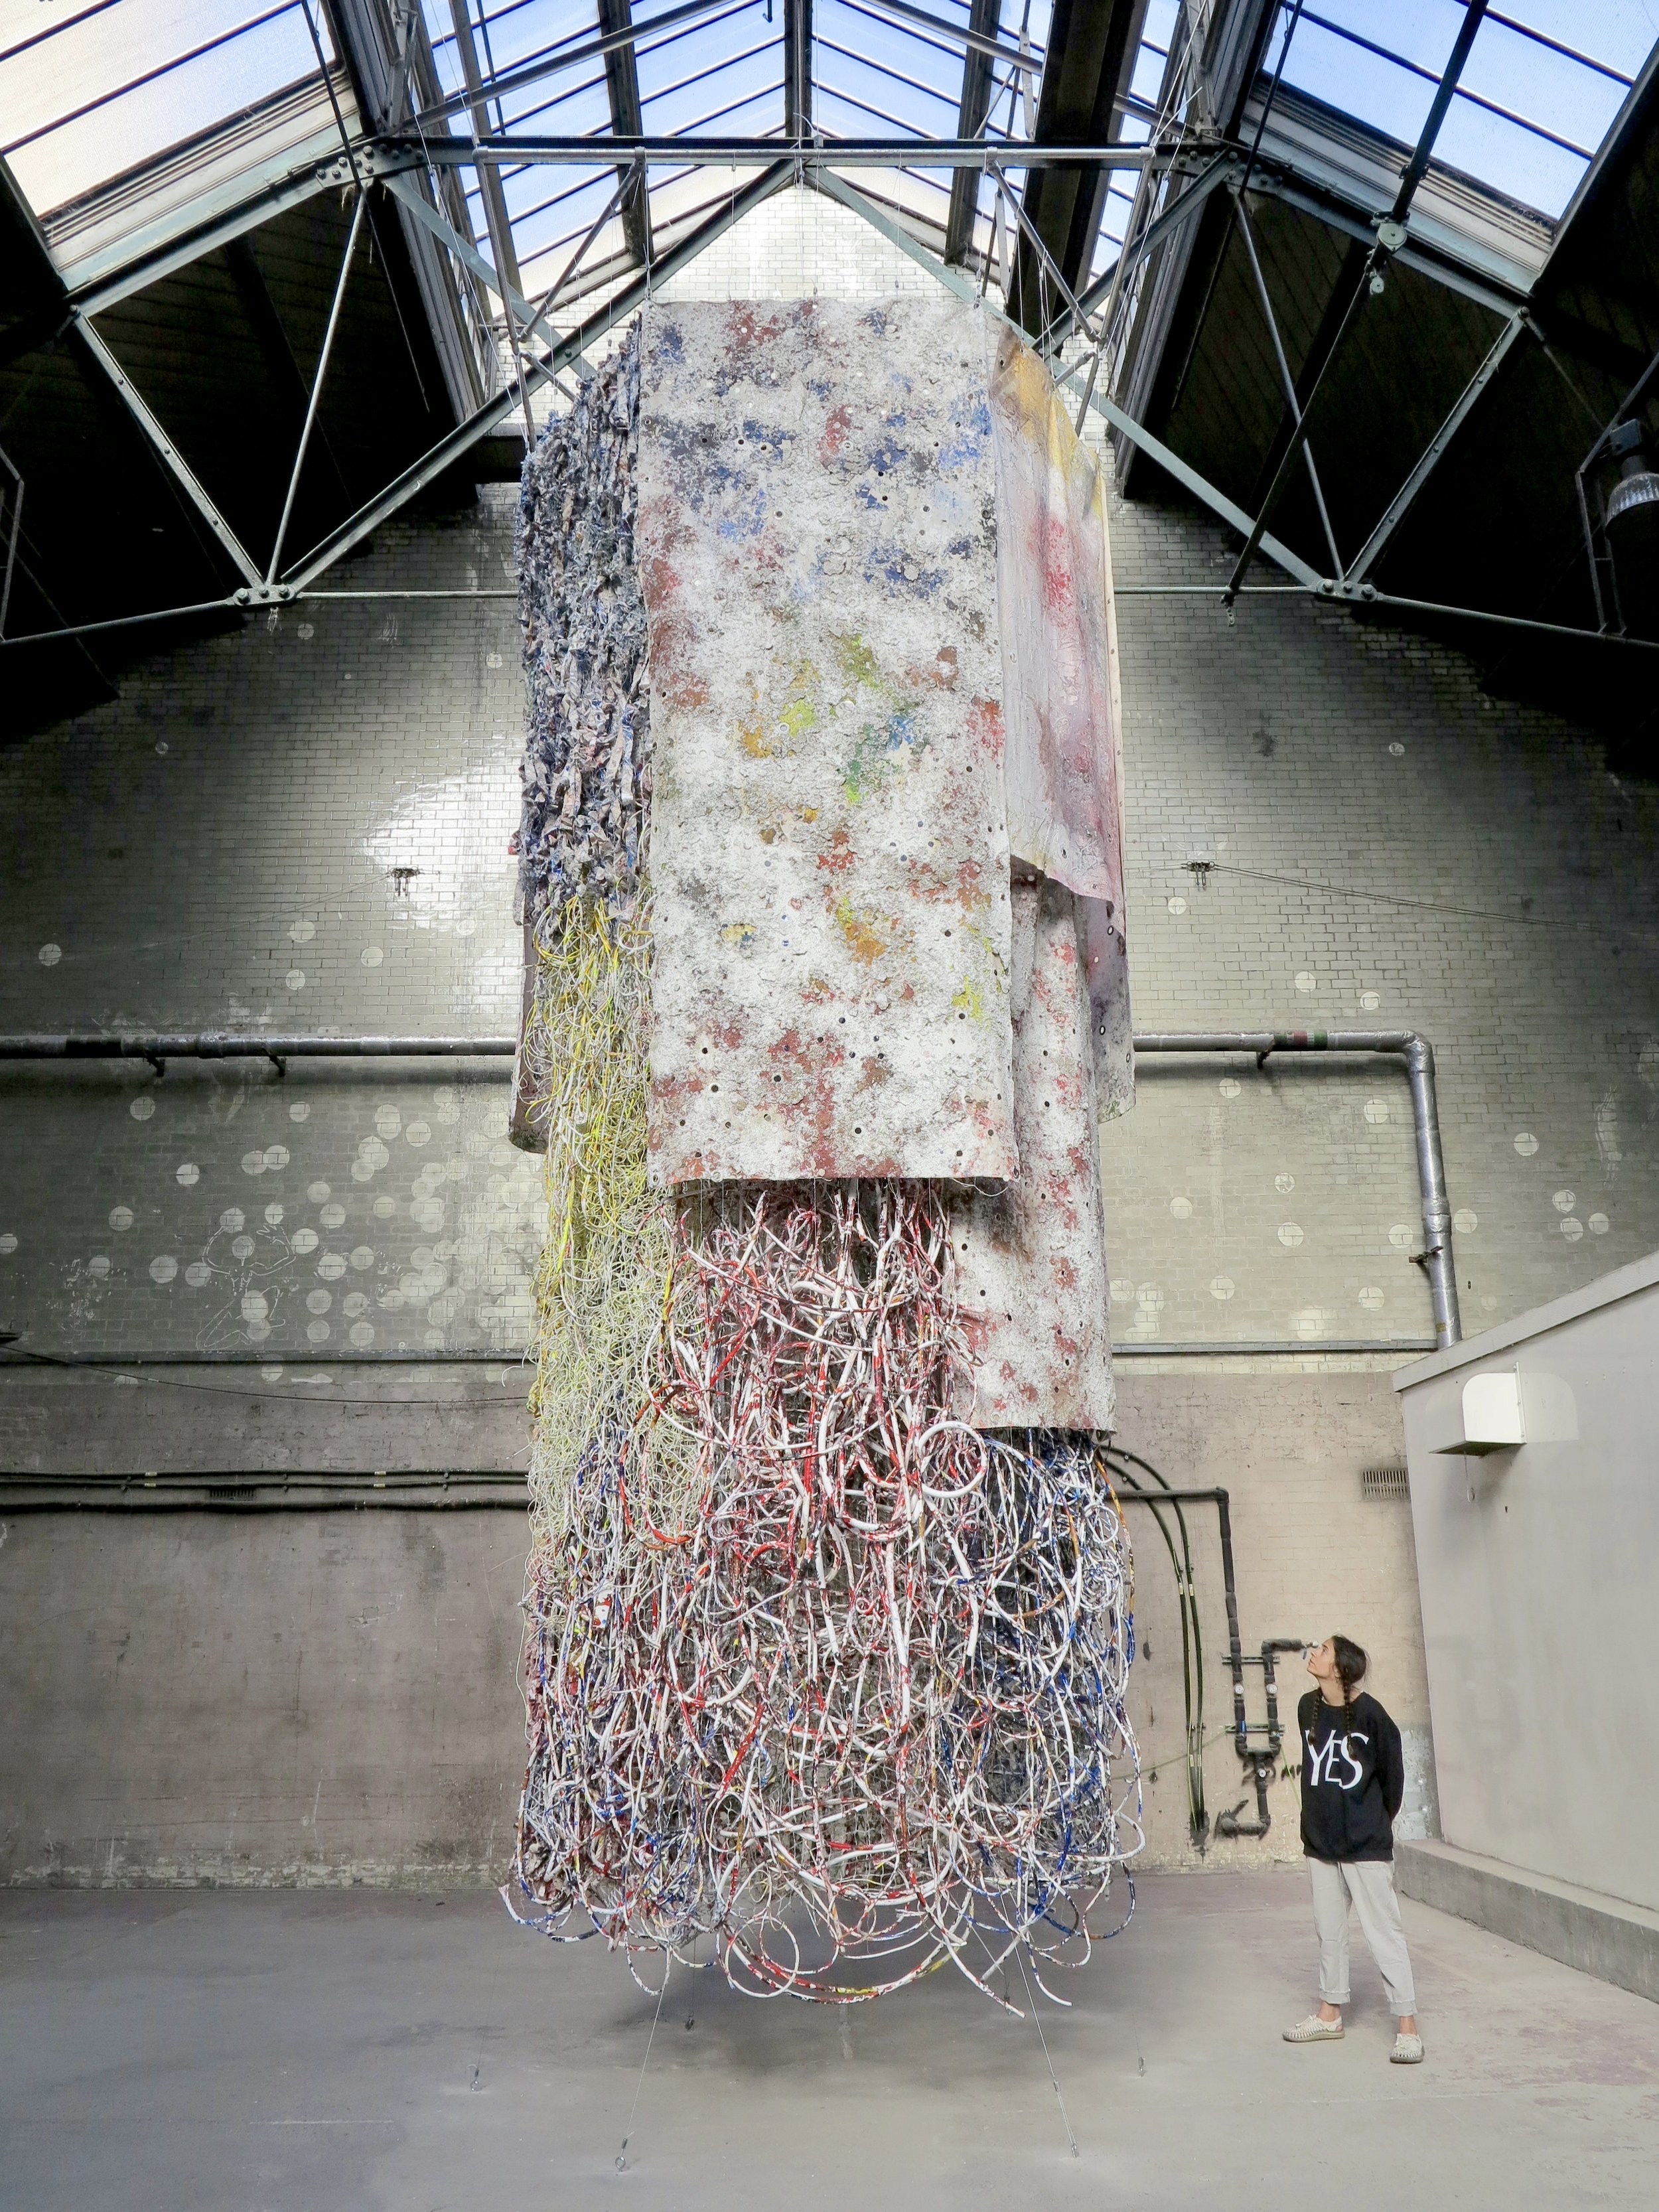   Hung Out to Dry    Gleaned electrical wires, ropes, and hand-torn ‘tagliatelle’ woven into industrial netting and hung with polymer-lichen canvas and printed debris nets  Part of the  Pigeon Park 2  exhibition, London 2022 